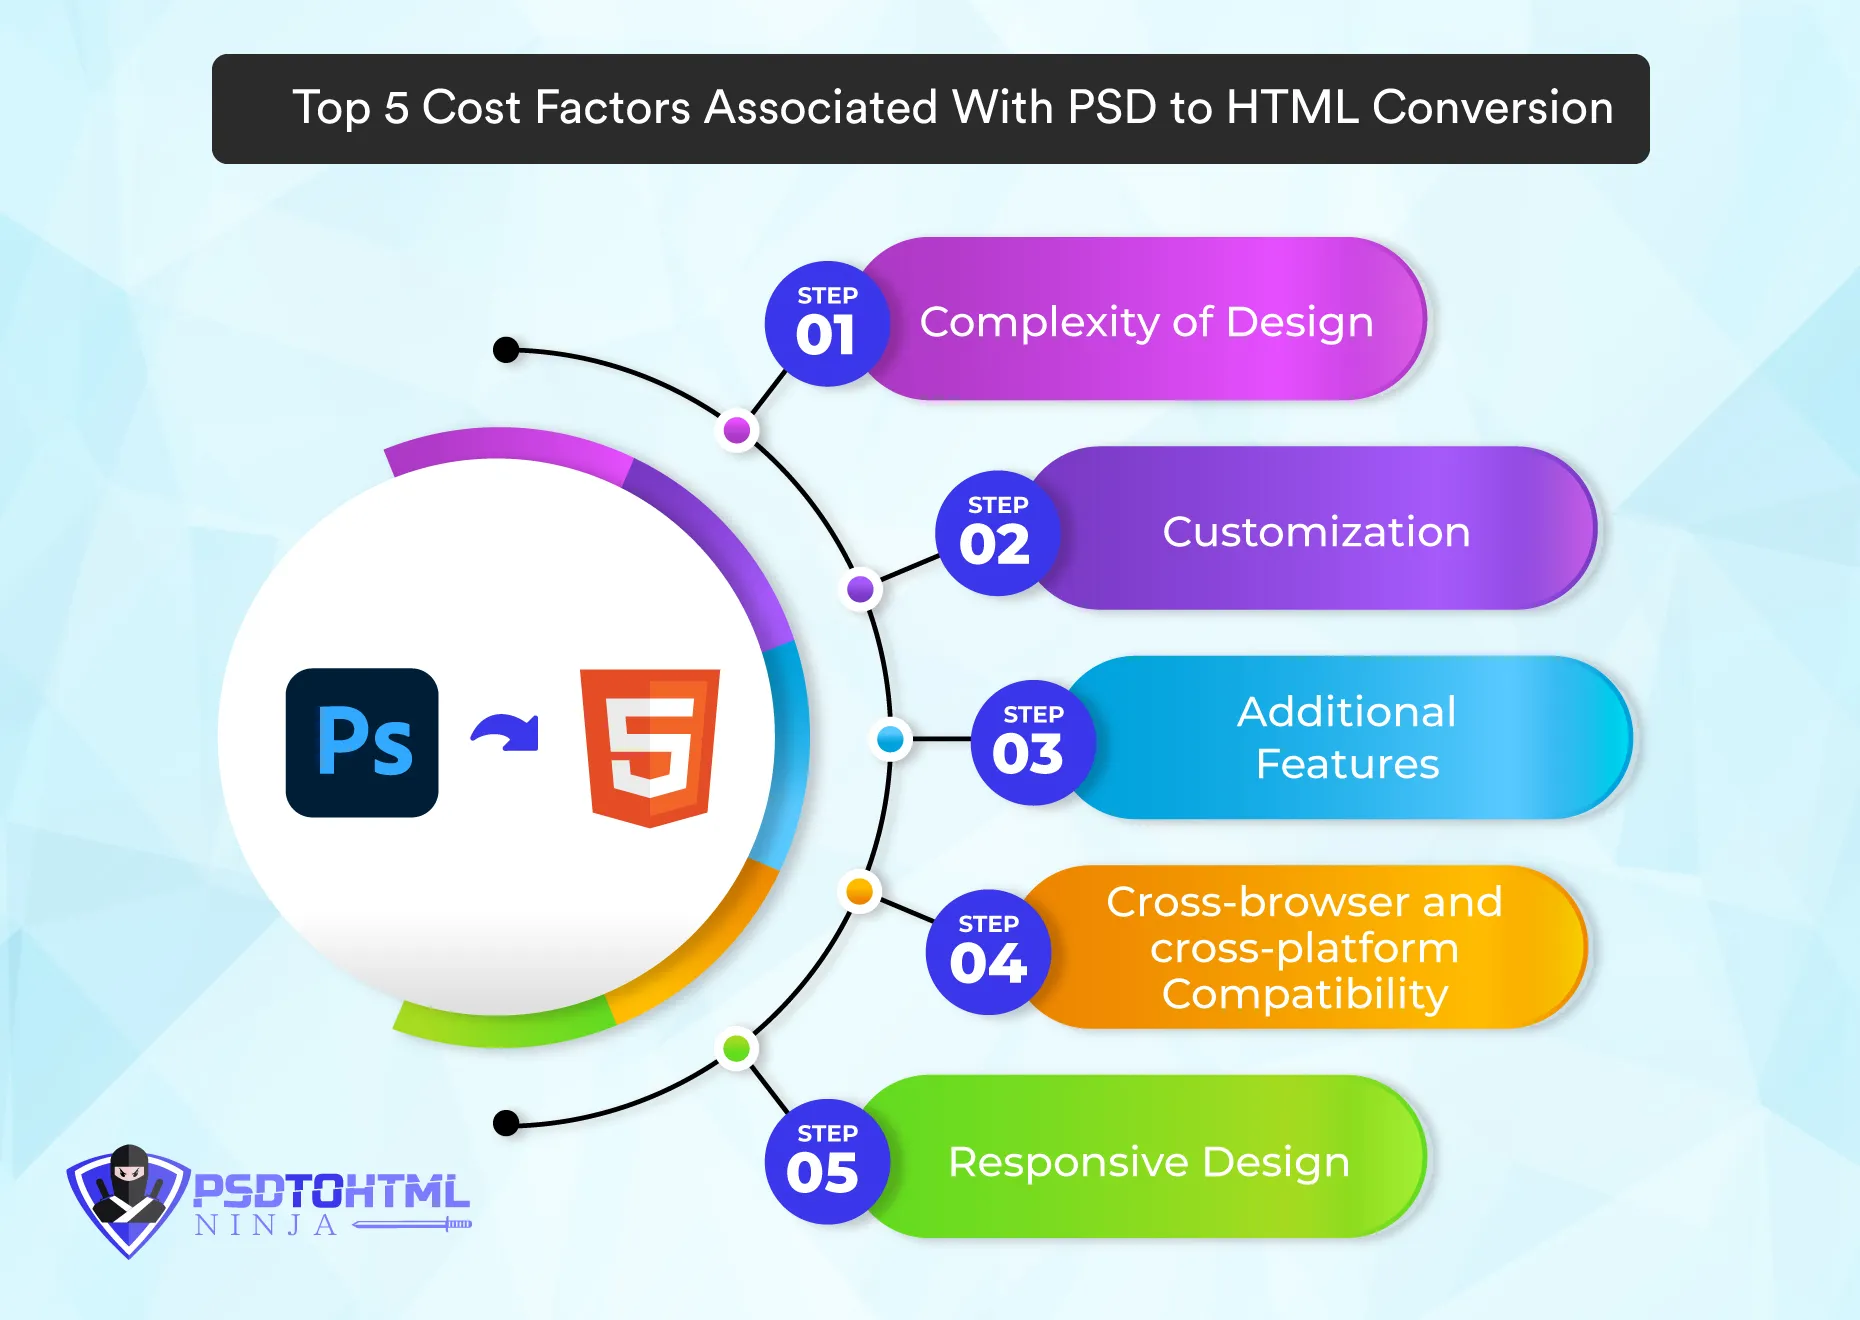 Cost factors associated with PSD to HTML conversion